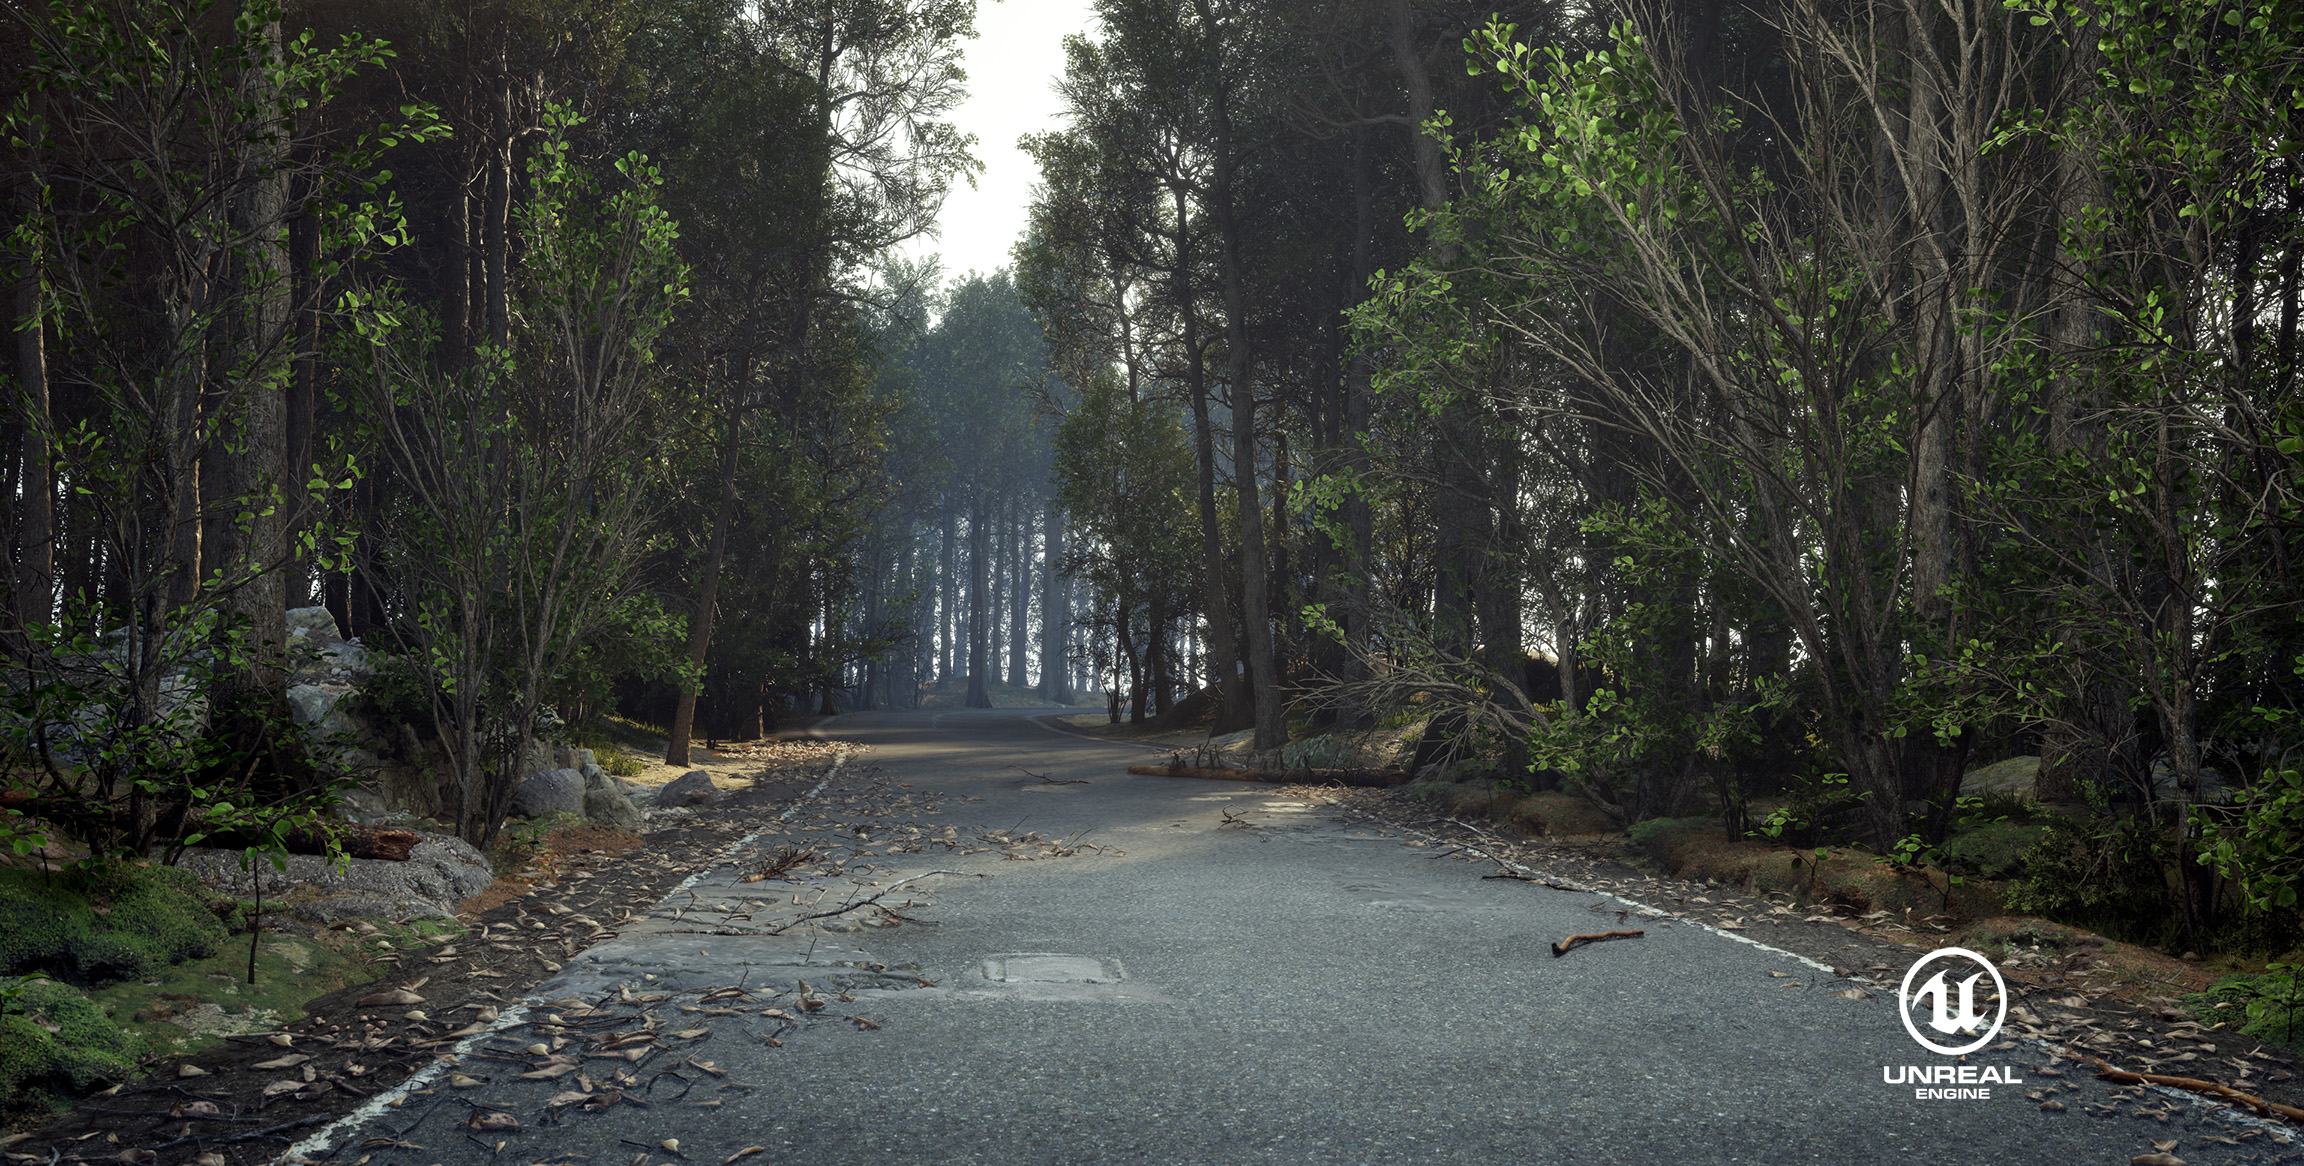 Forest road